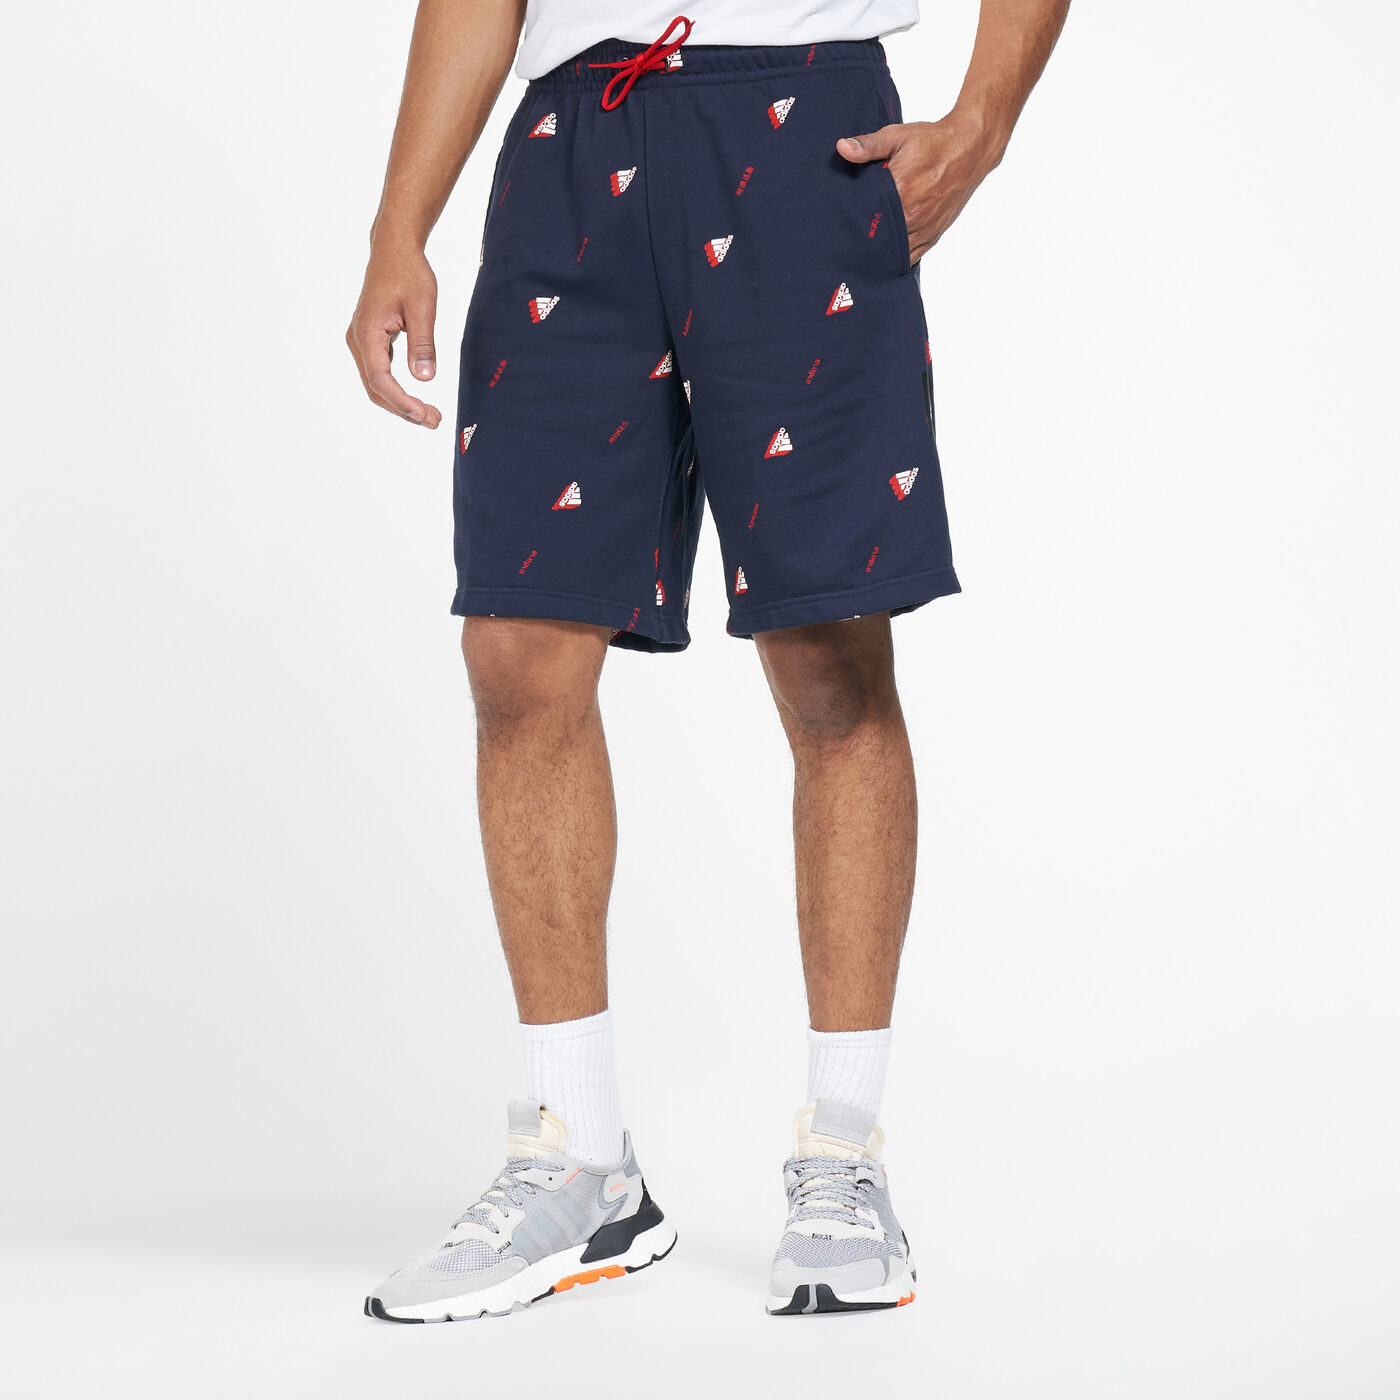 Men's Must Haves Graphics Shorts